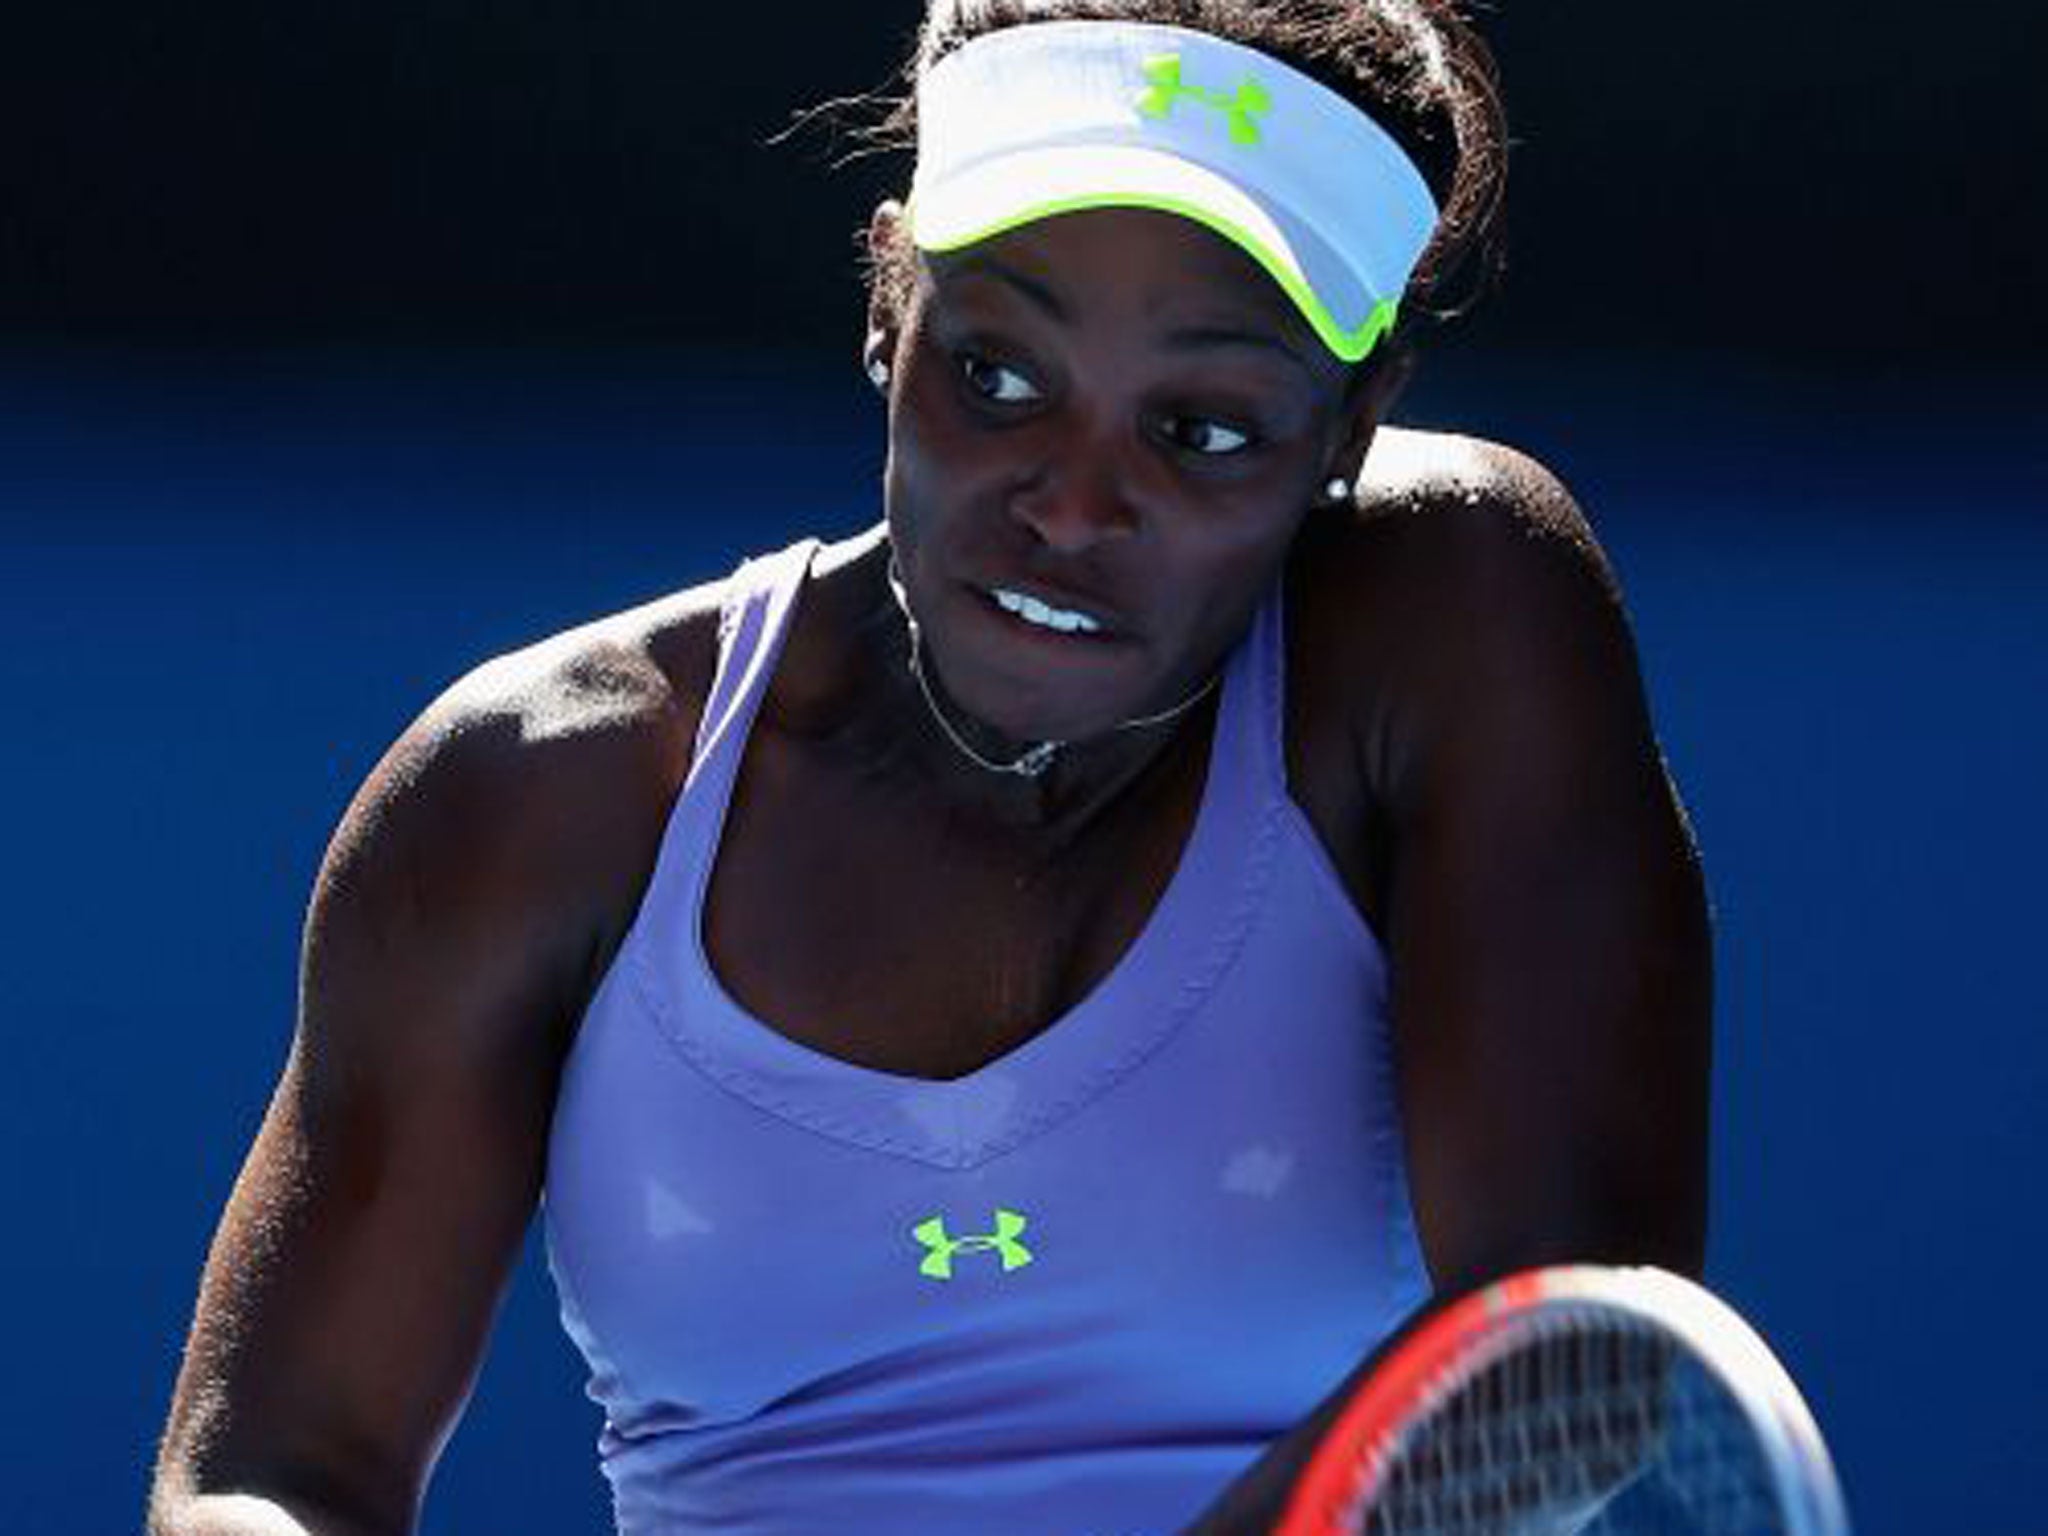 Sloane Stephens lost seven out of nine matches after the Australian Open